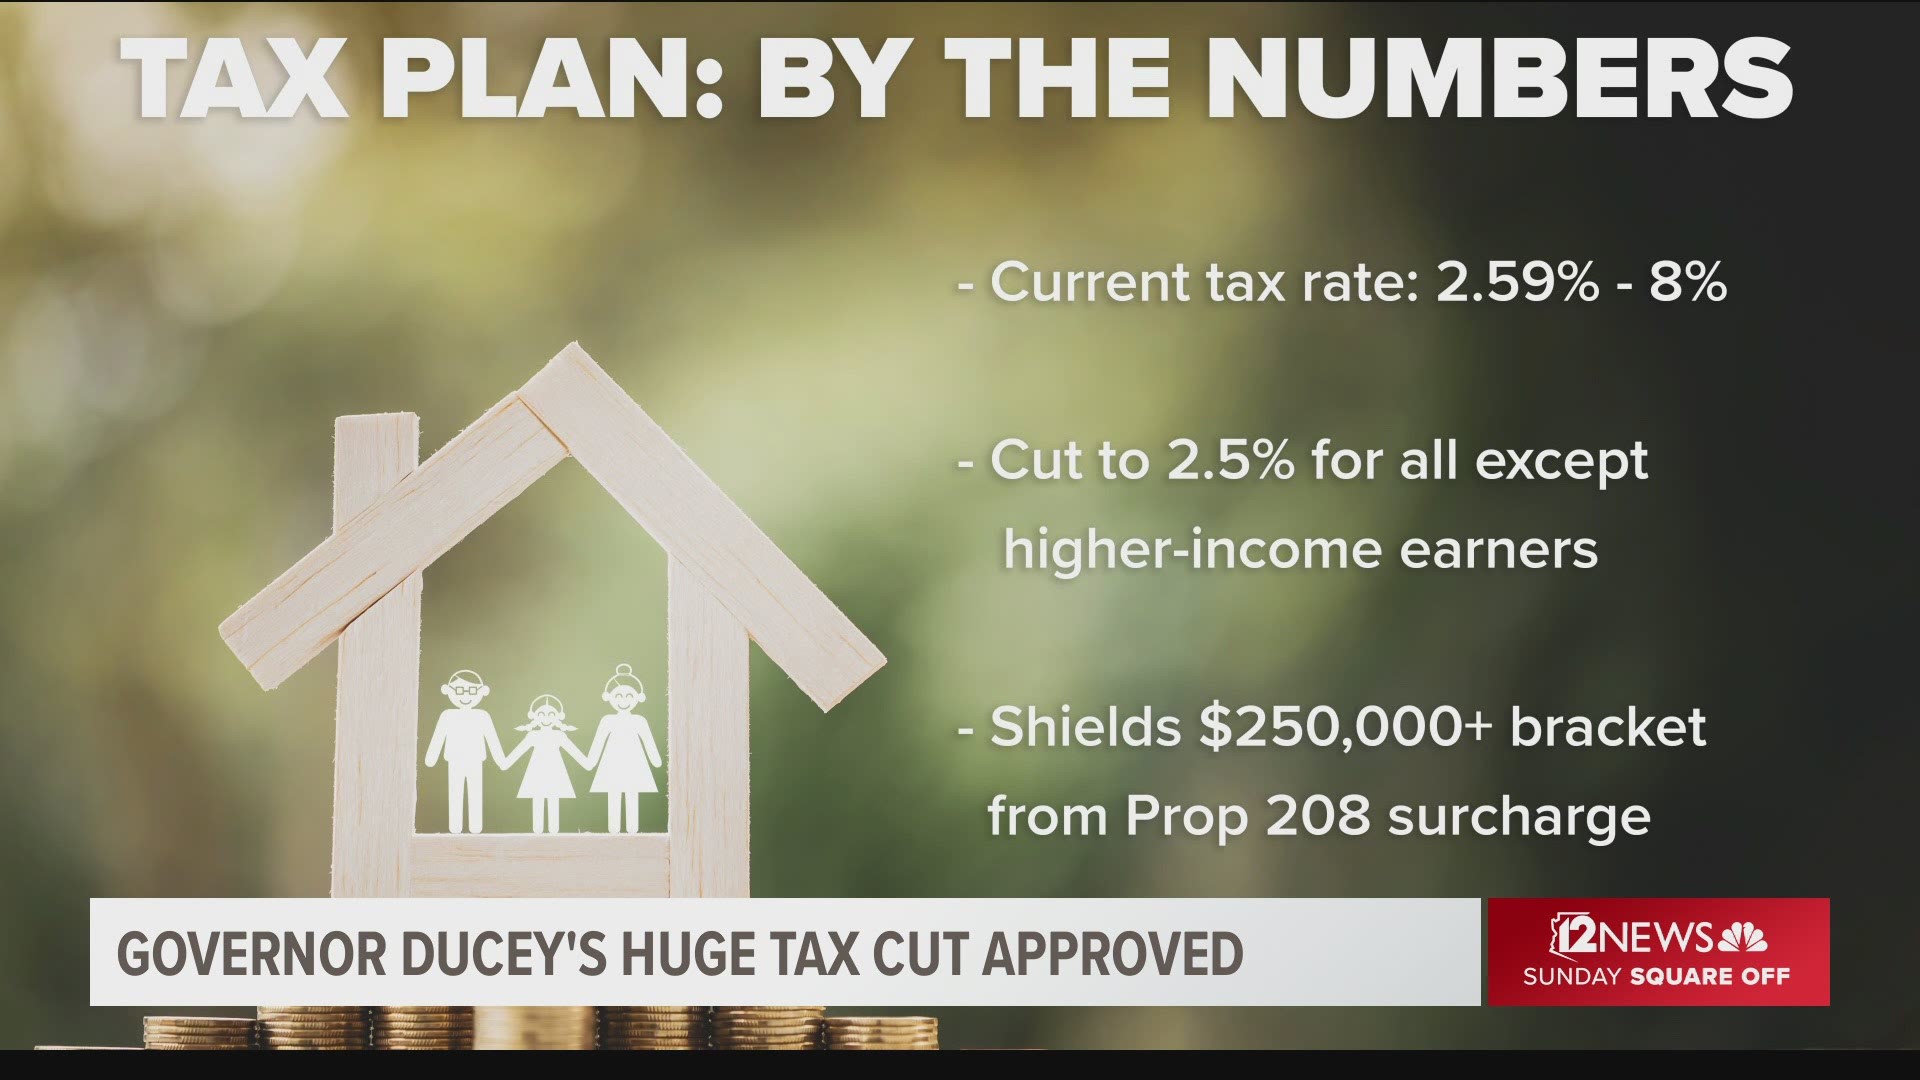 This week, Gov. Doug Ducey is expected to sign into law the largest tax cut in Arizona history.